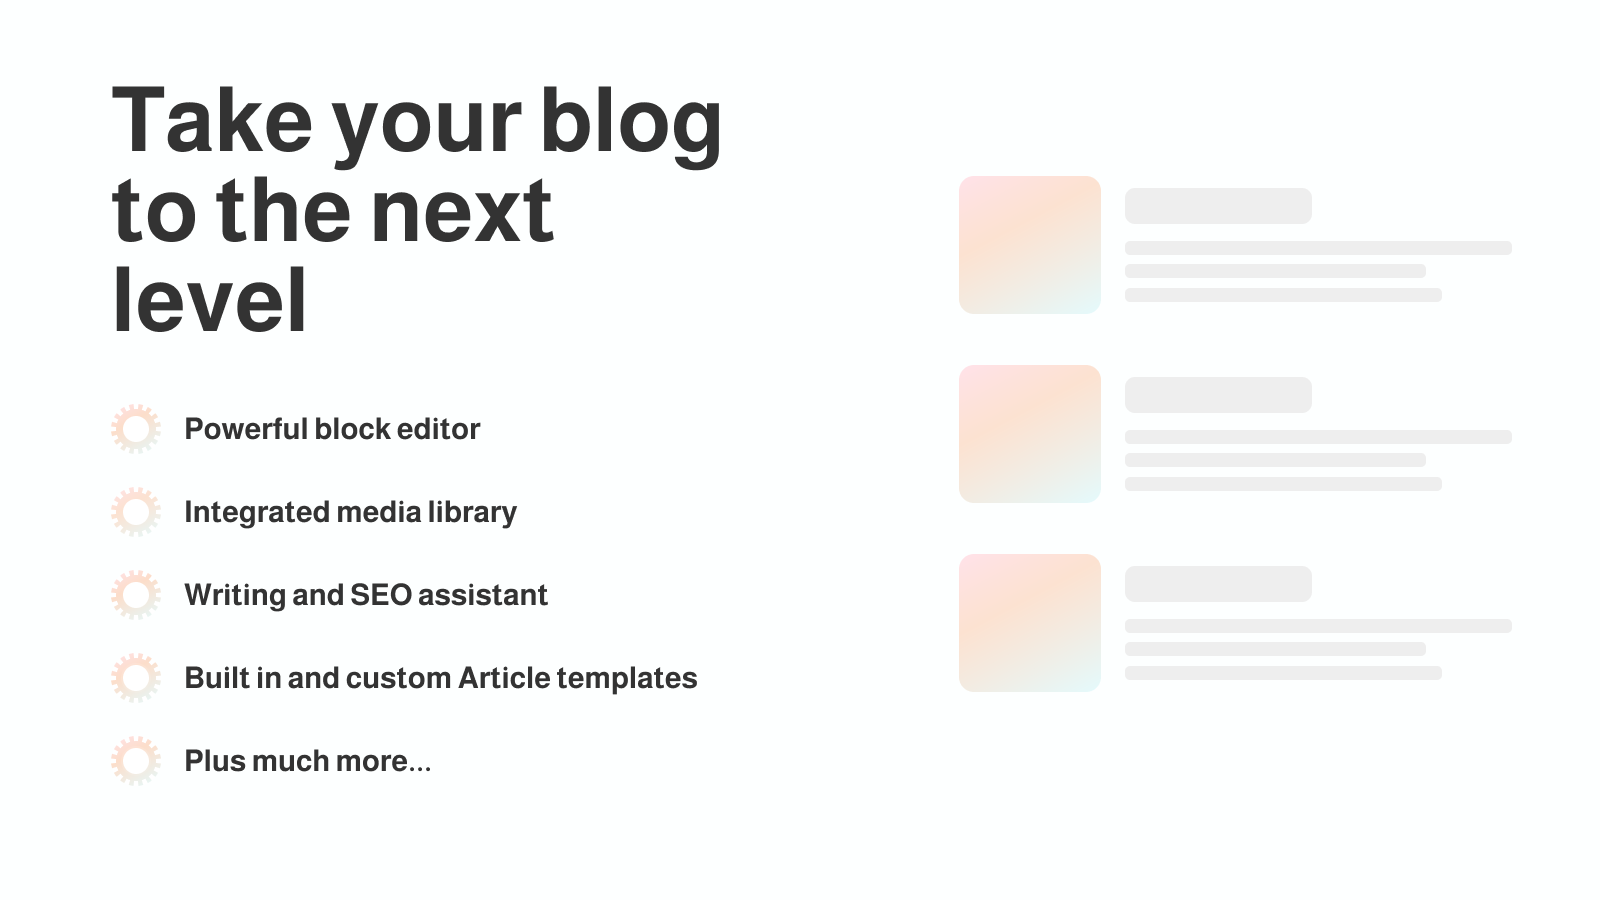 Take your blog to the next level